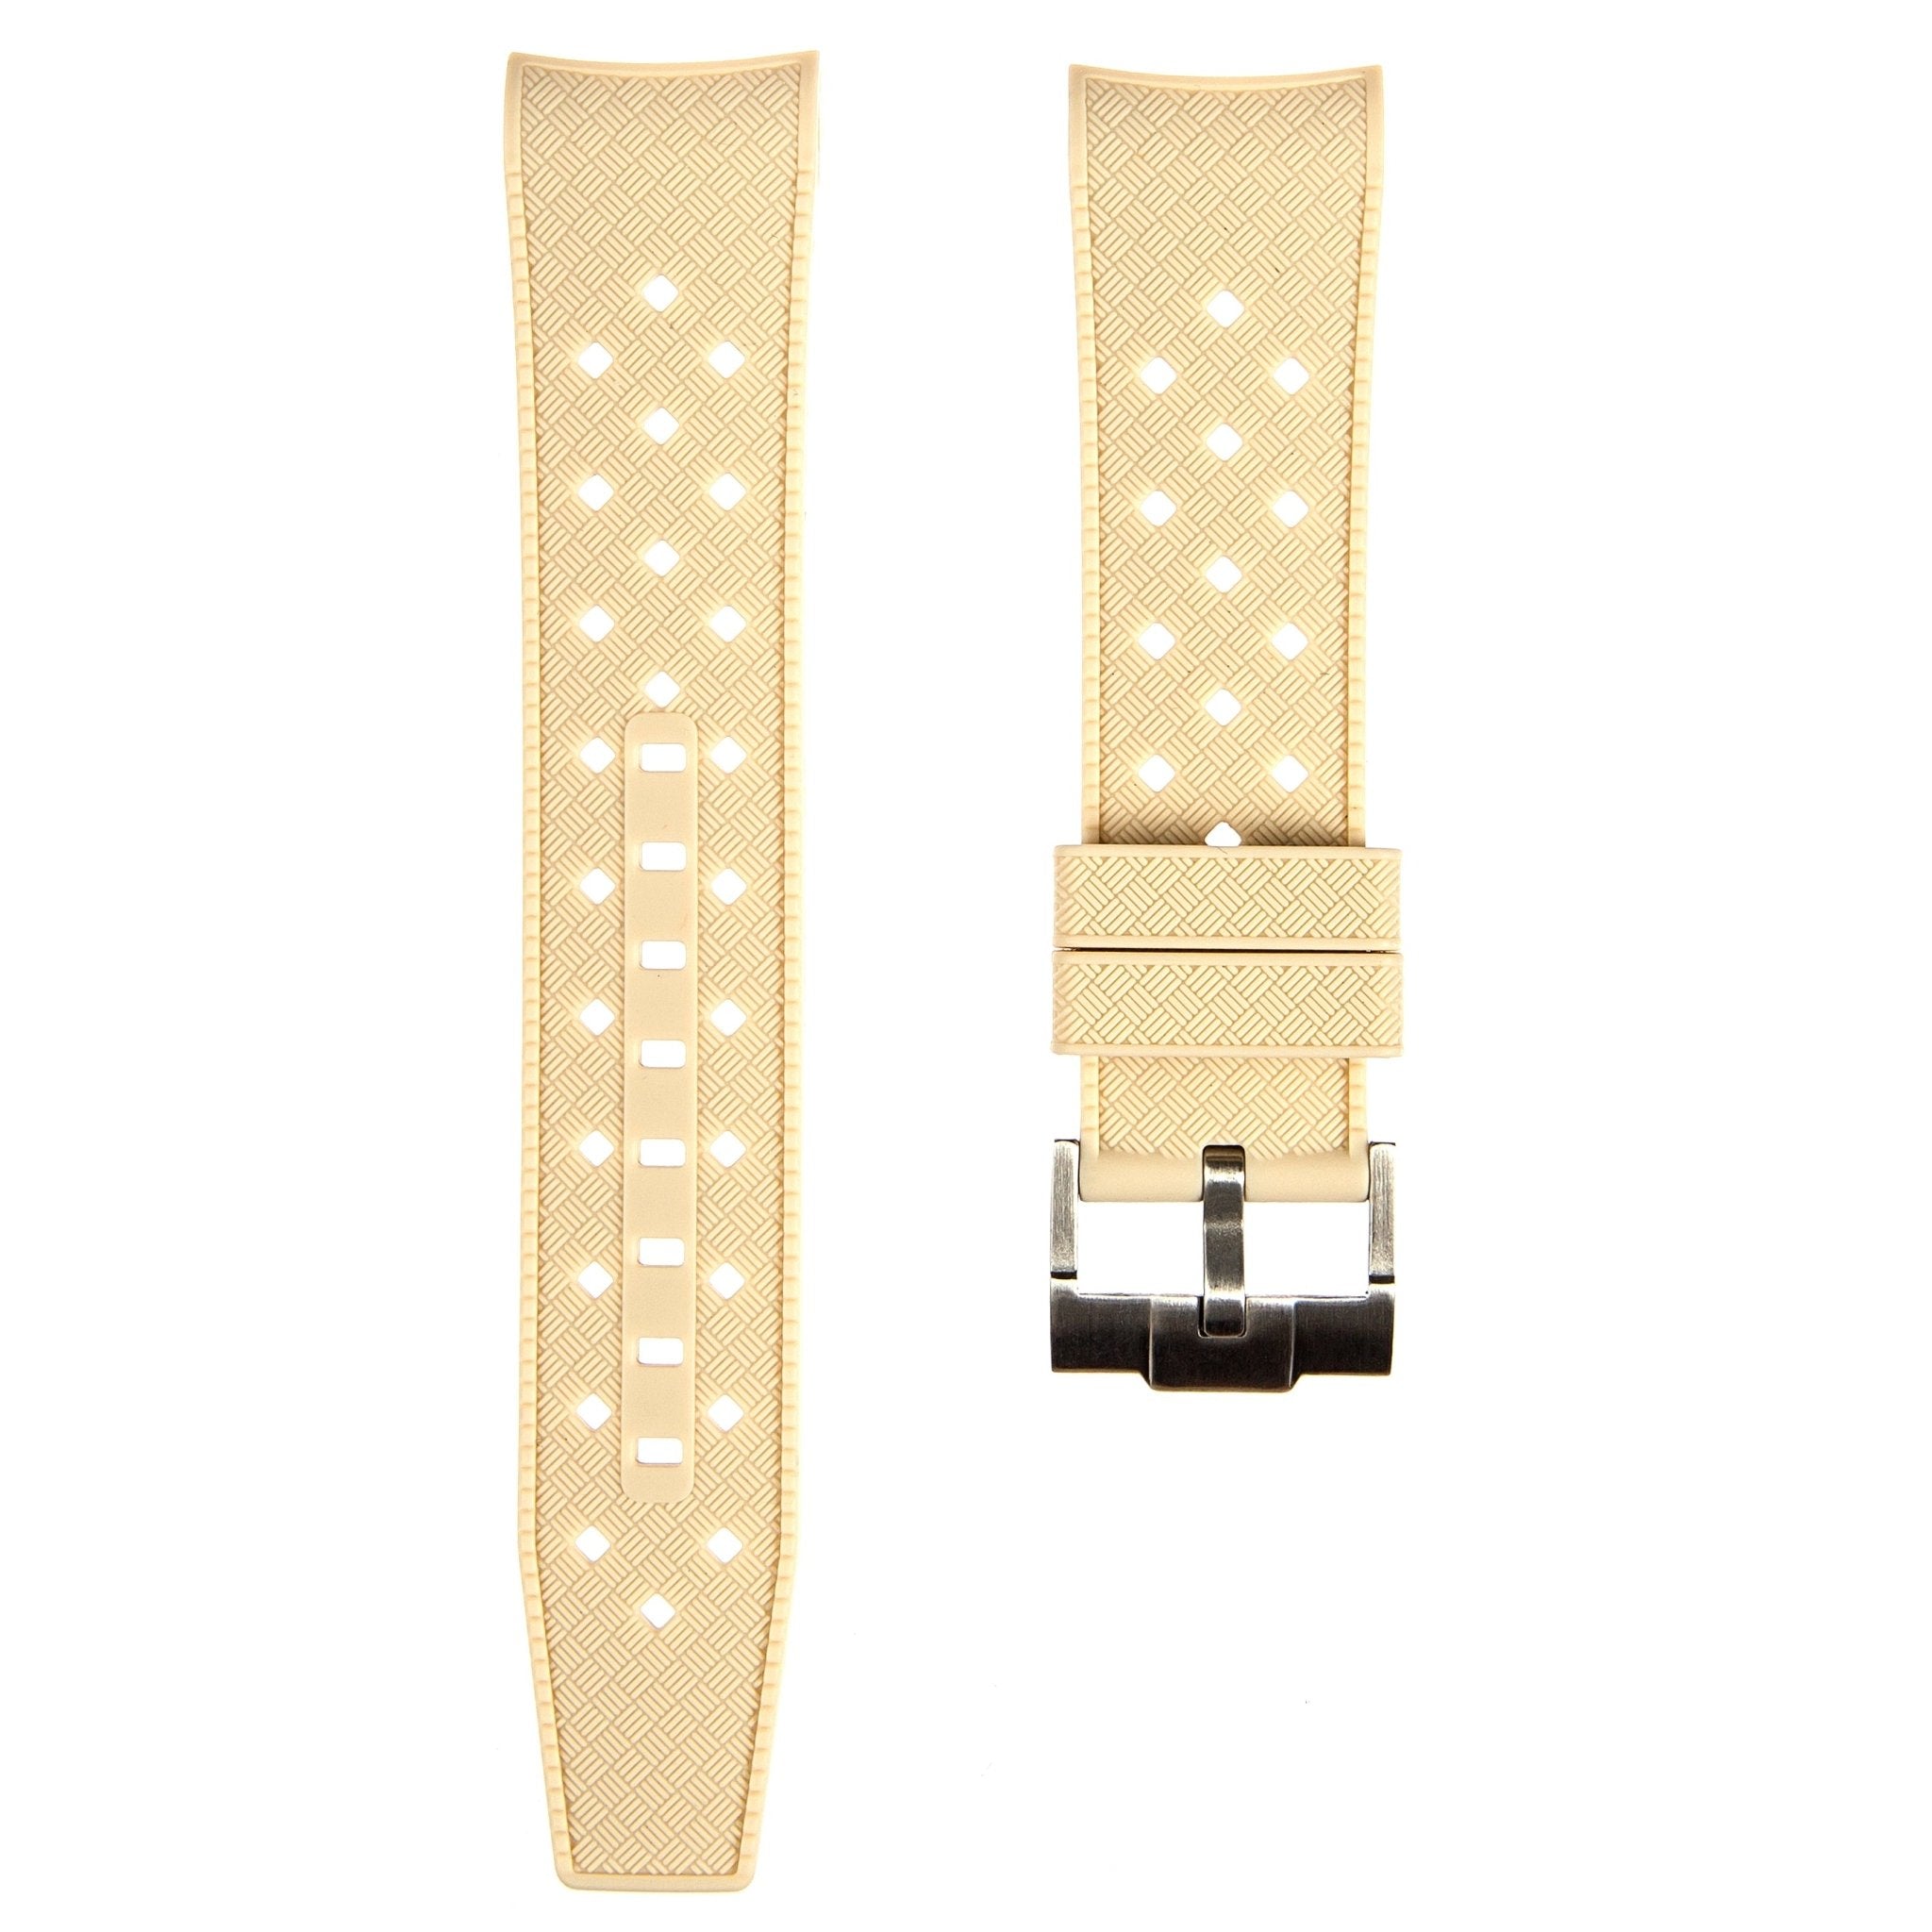 Vintage Tropical Curved End Premium Silicone Strap - Compatible with Blancpain x Swatch - Beige (2415) -StrapSeeker